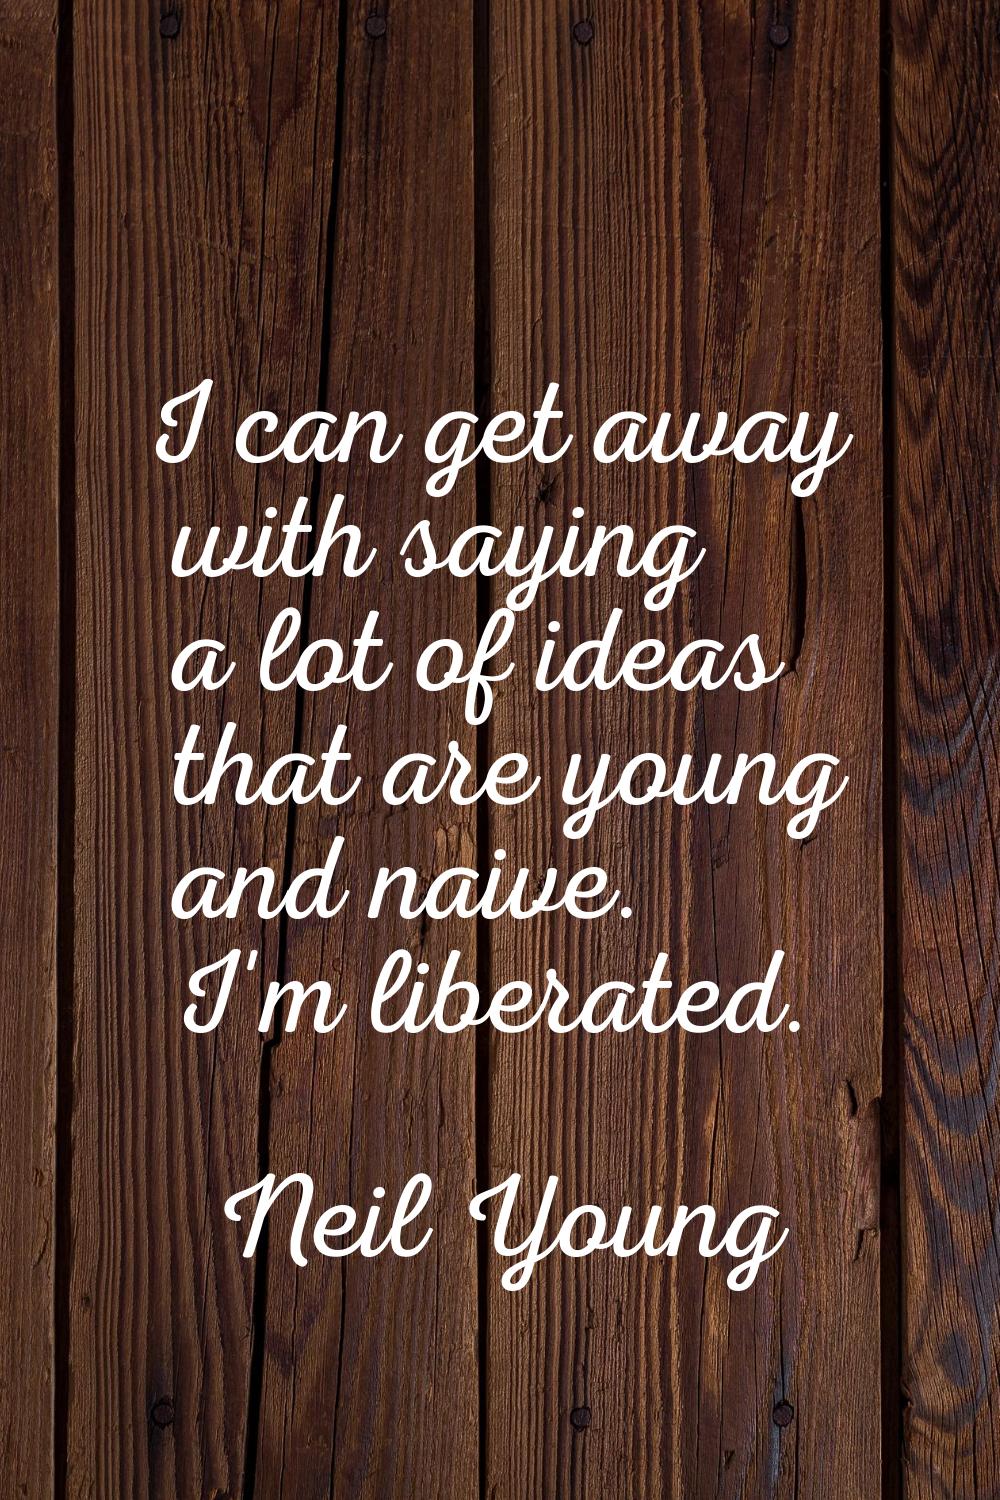 I can get away with saying a lot of ideas that are young and naive. I'm liberated.